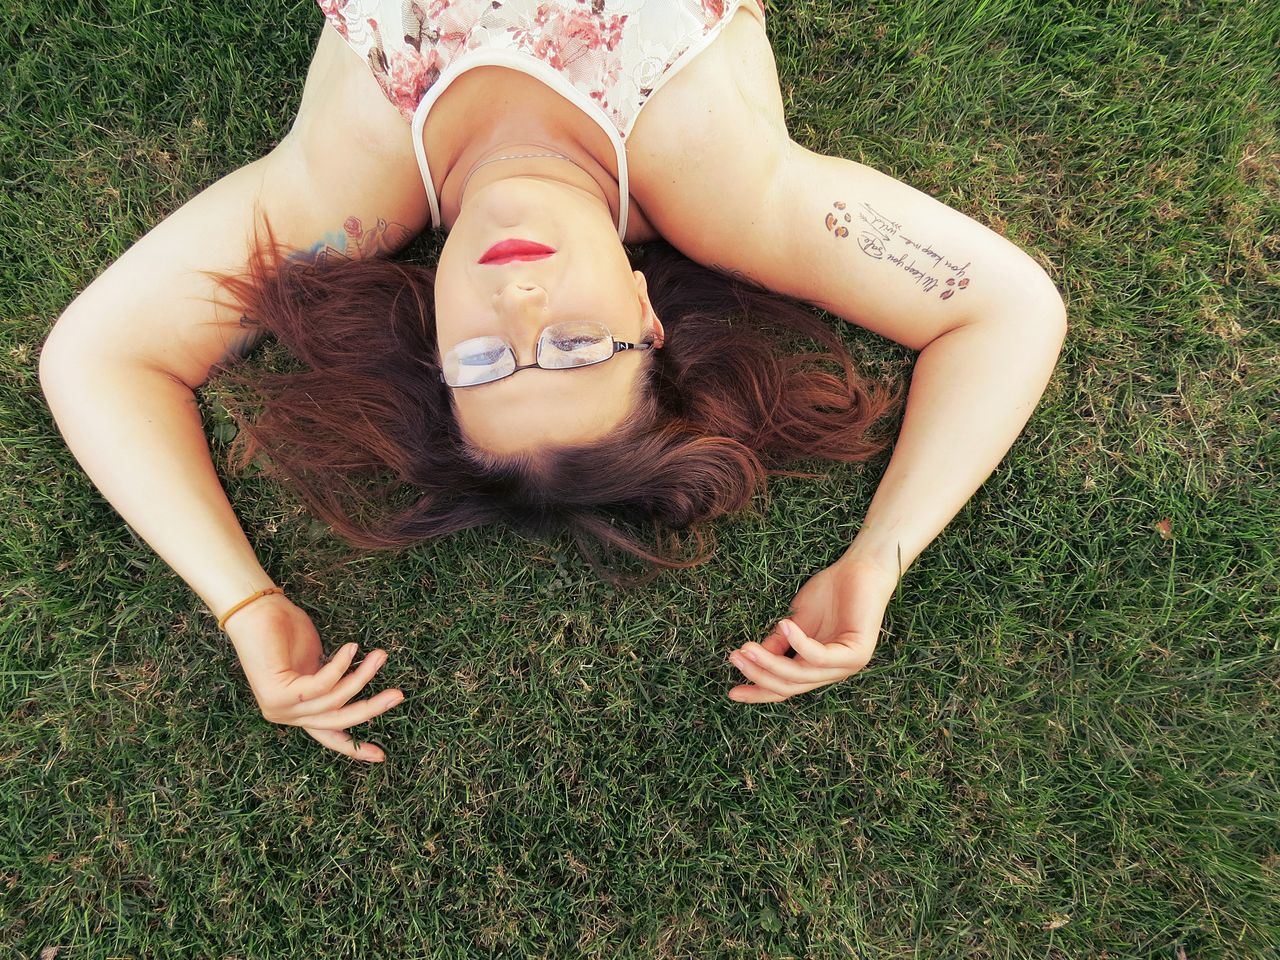 eyes closed, only women, grass, lying down, adults only, one woman only, adult, one person, people, women, day, young adult, outdoors, one young woman only